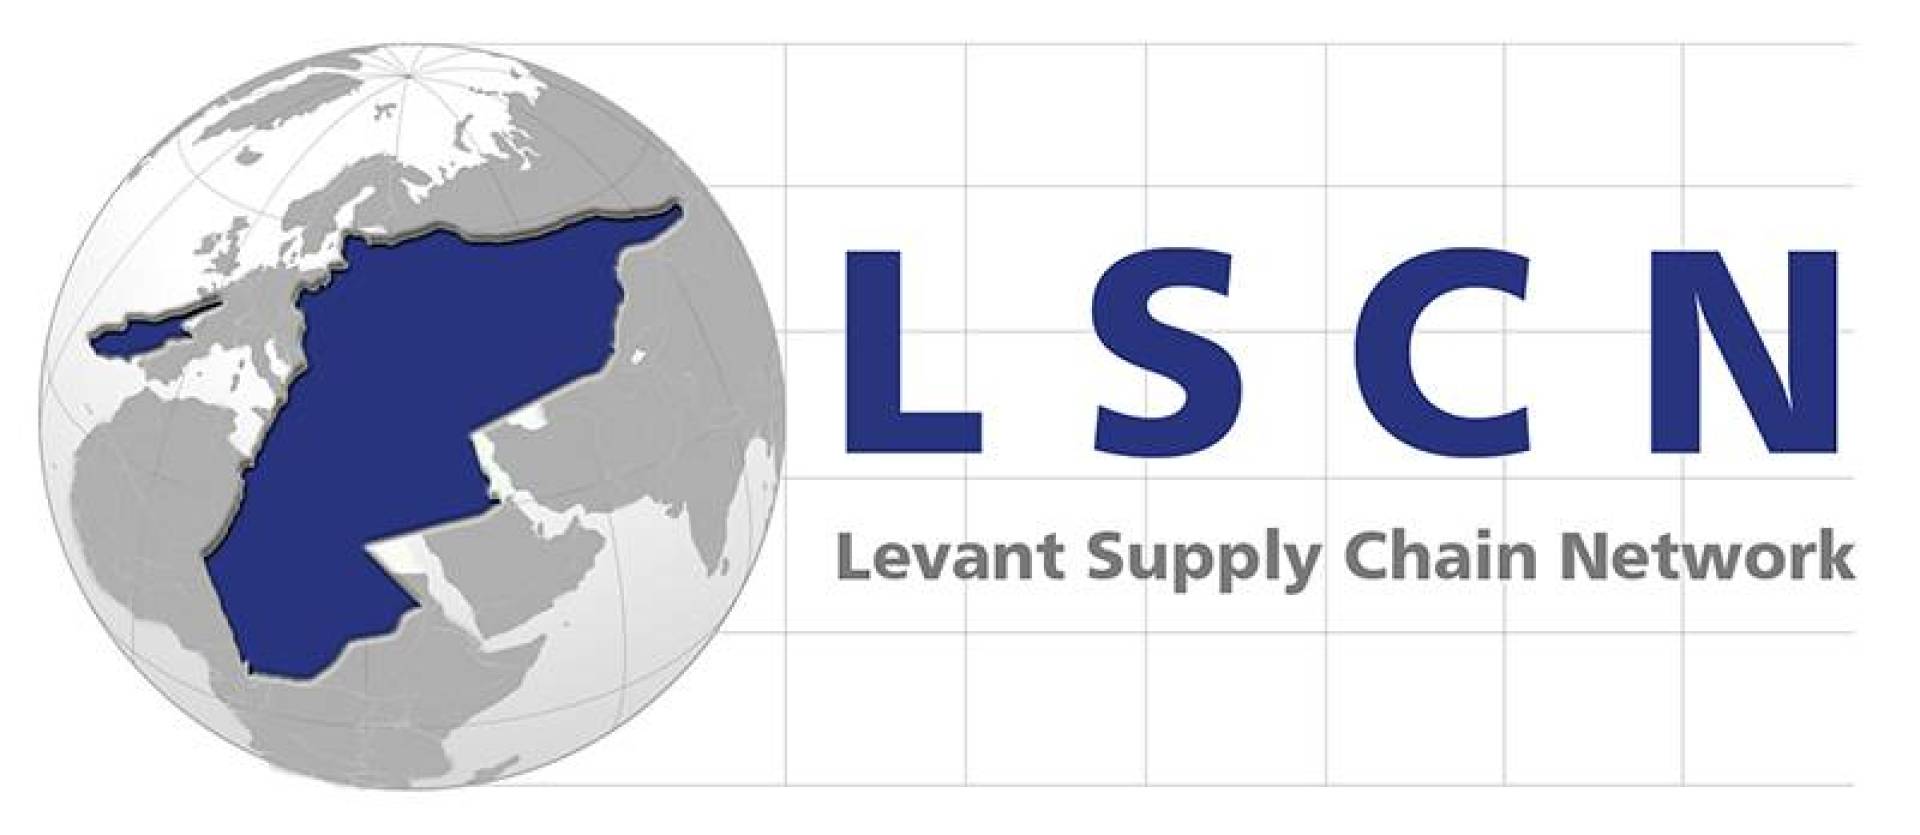 Levant Supply Chain Network